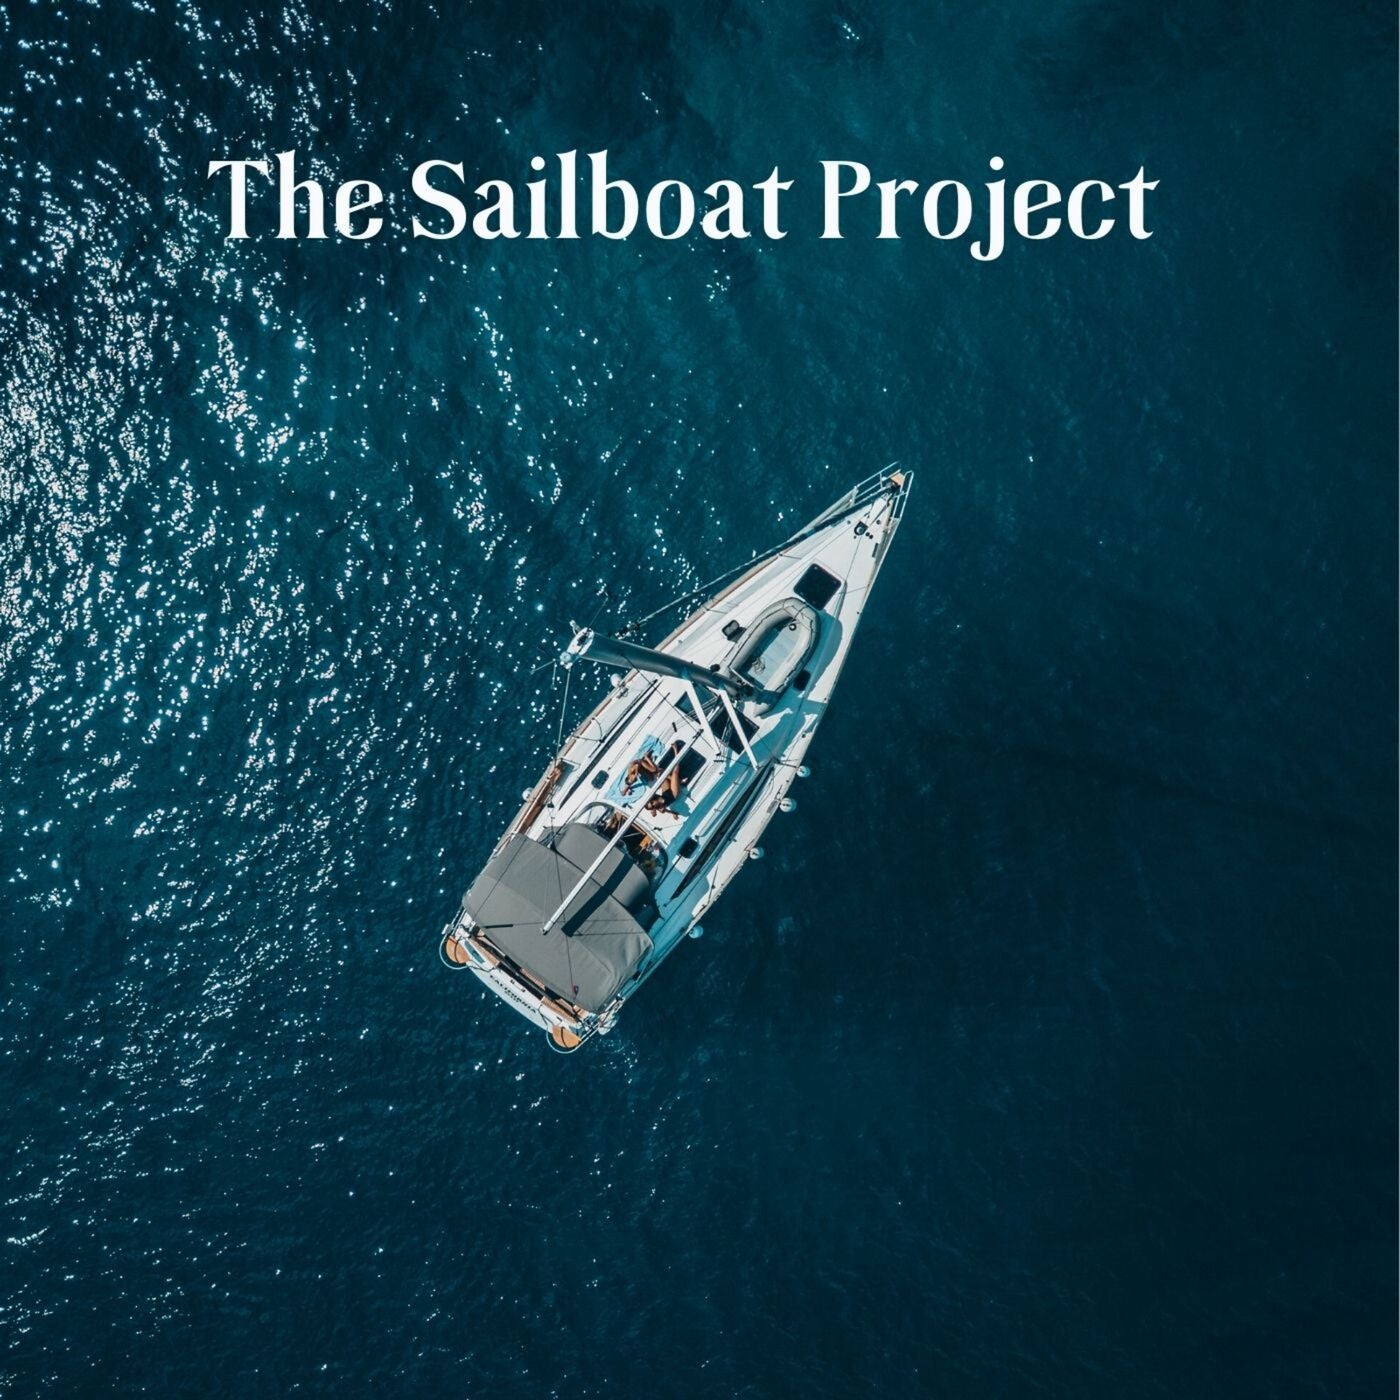 The Sailboat Project